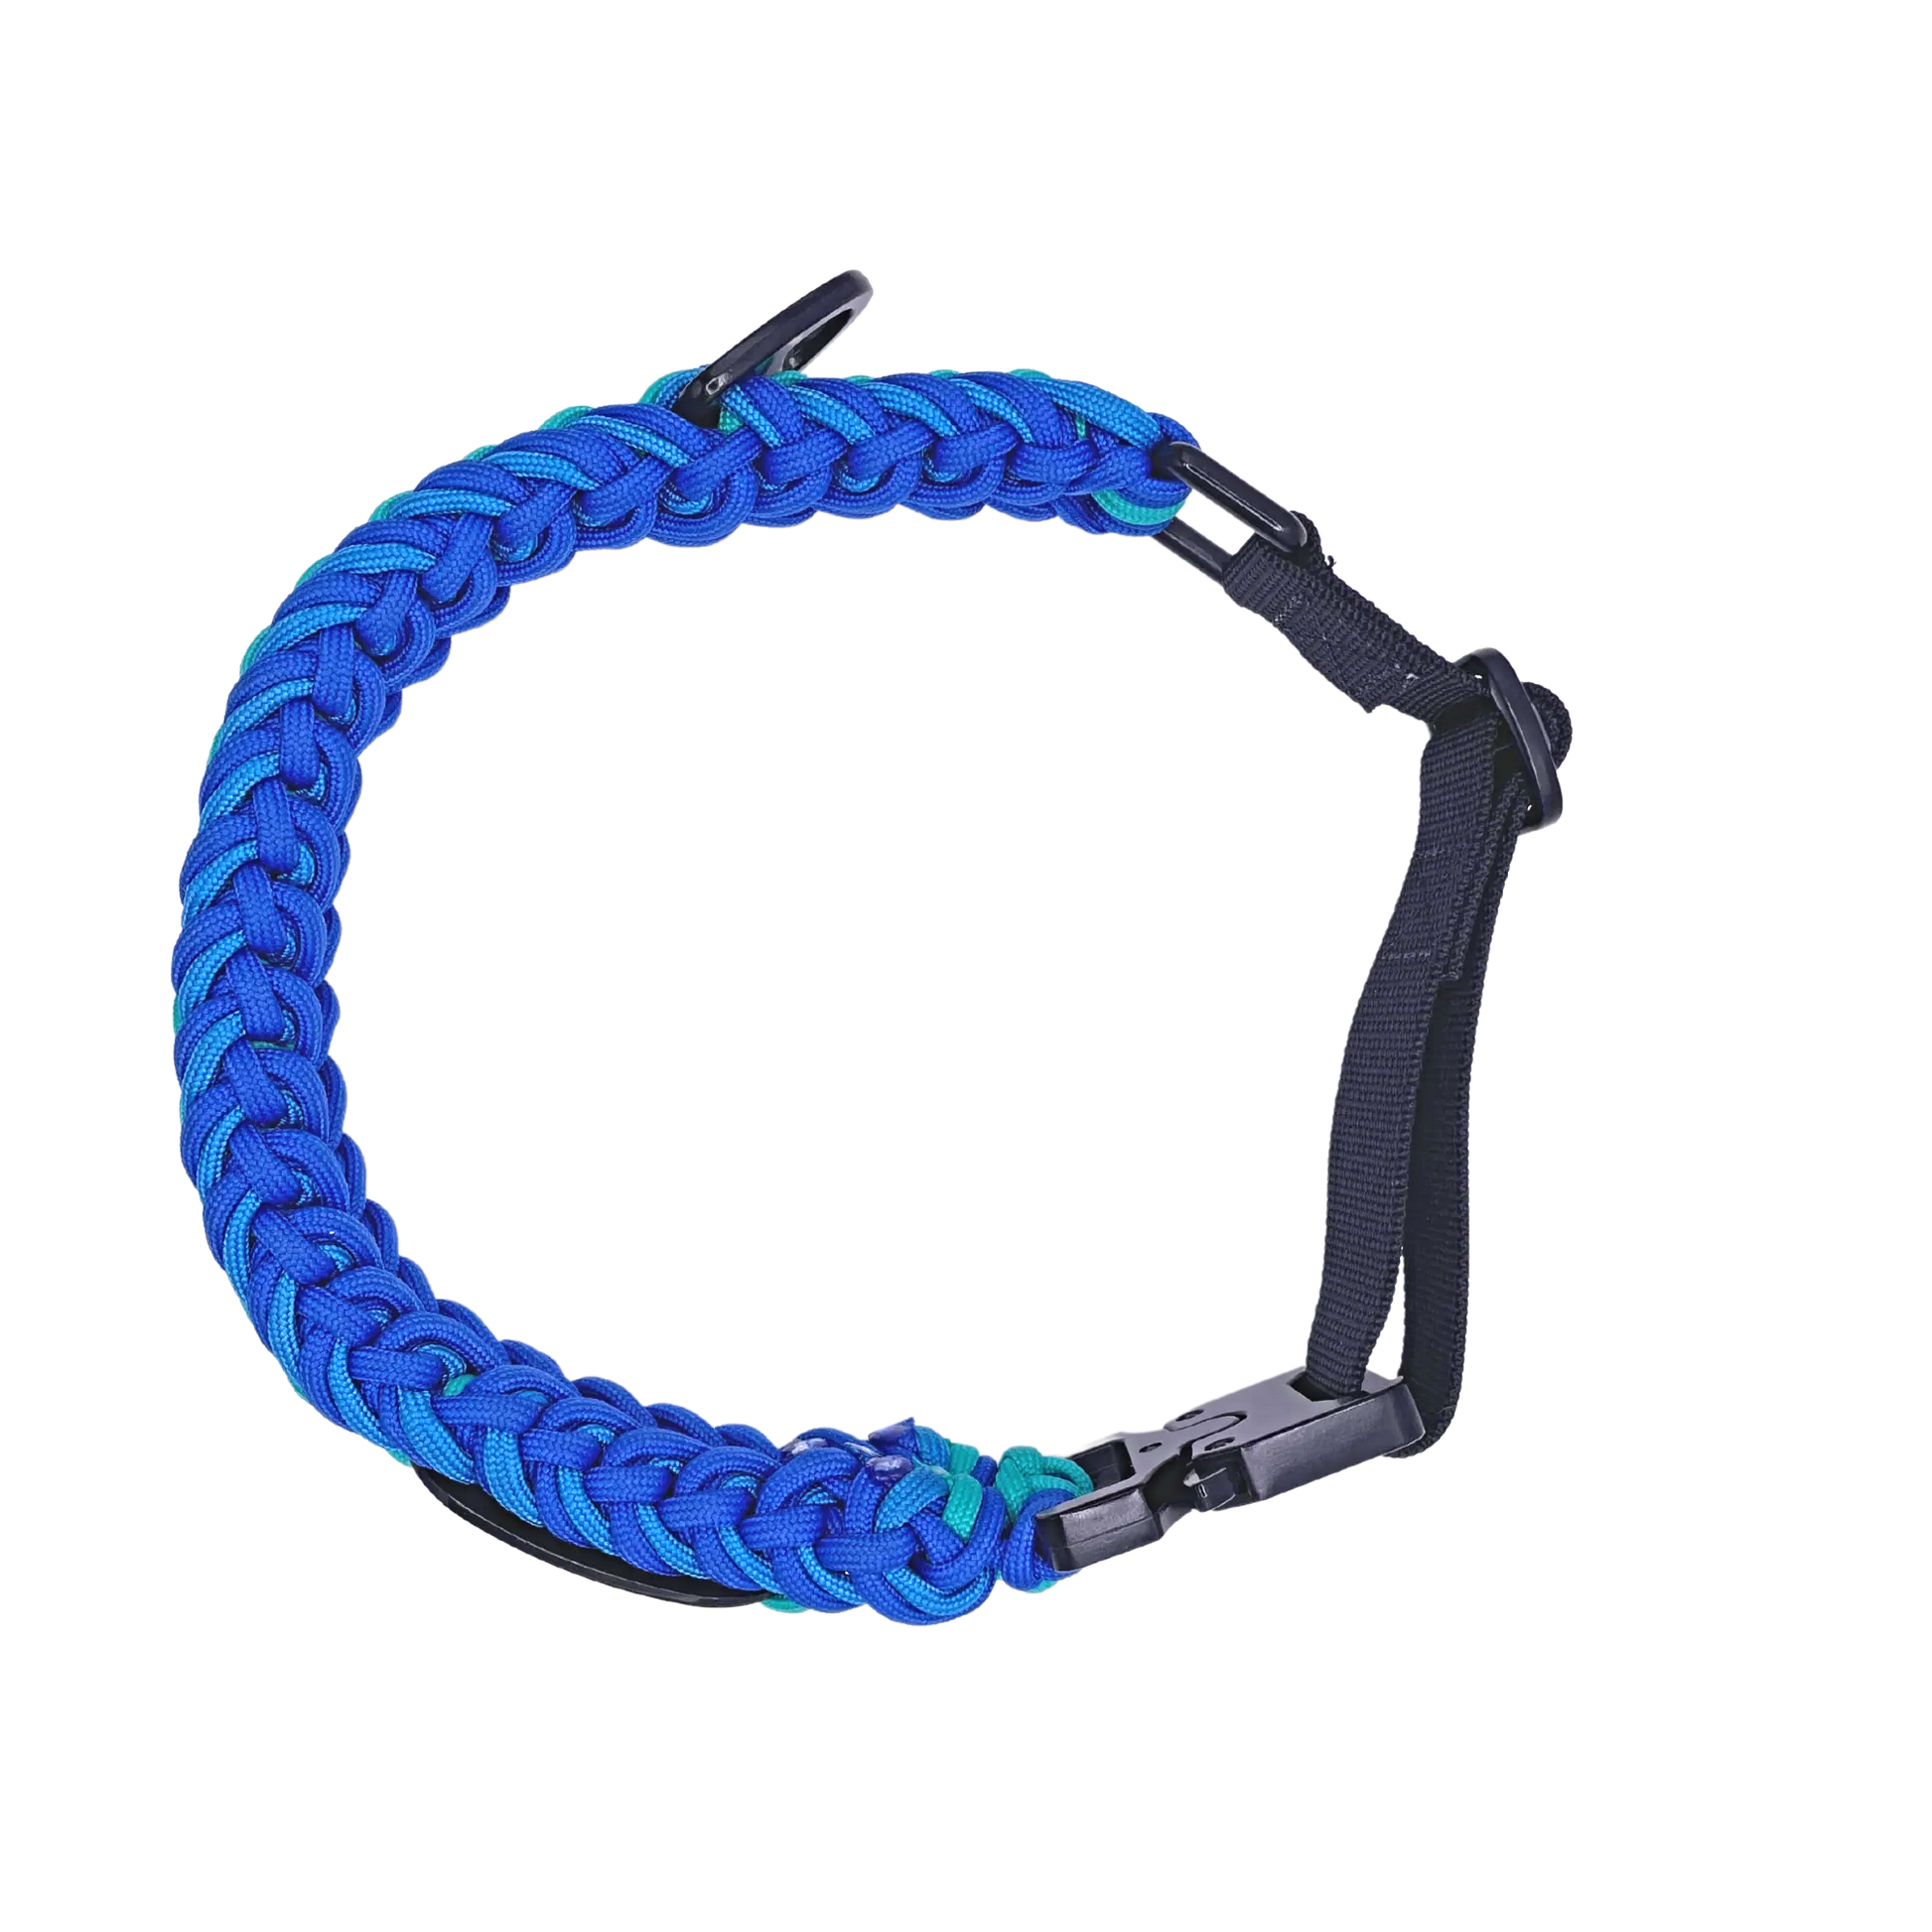 Premium Paracord Collar with Black Tactical hardware and A Quick Release Buckle In Teal and Blue